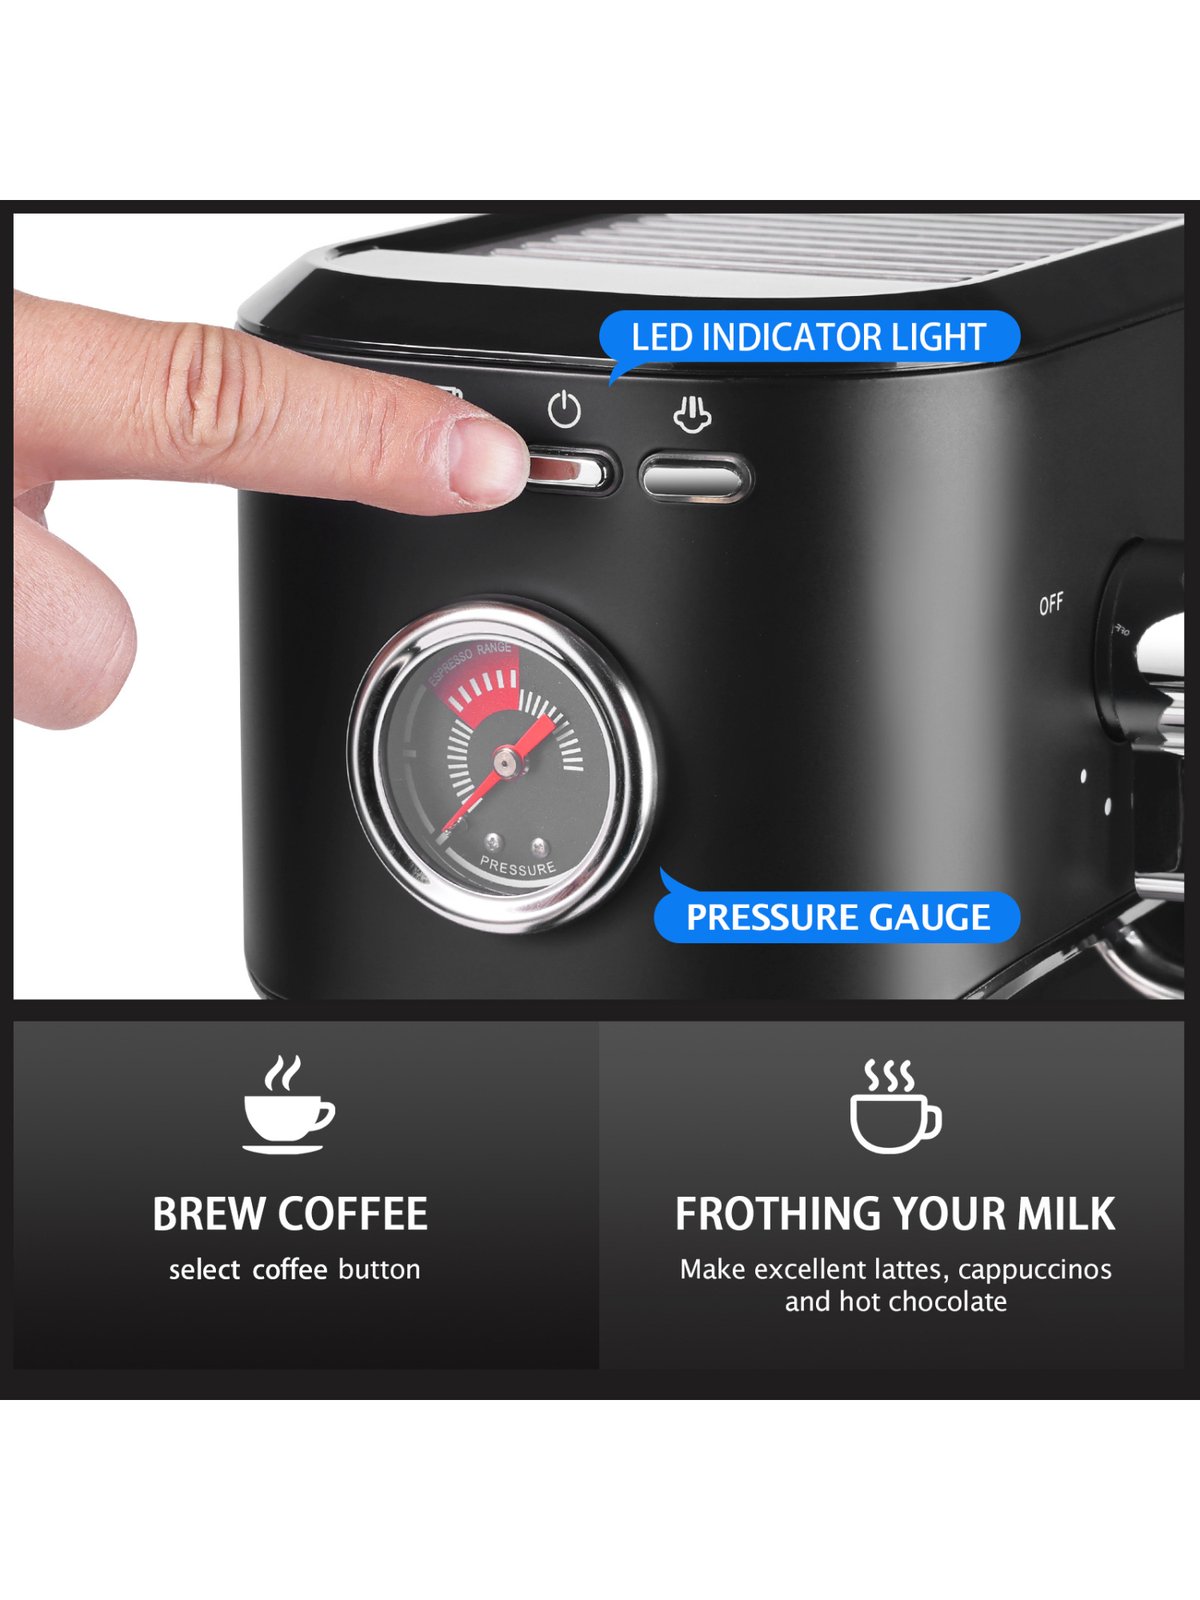 https://images.verishop.com/cyetus-black-espresso-machine-with-milk-steam-frother-wand-electric-coffee-bean-grinder-and-4-in-1-automatic-milk-frother-steamer/M00679283562668-751263690?auto=format&cs=strip&fit=max&w=1200